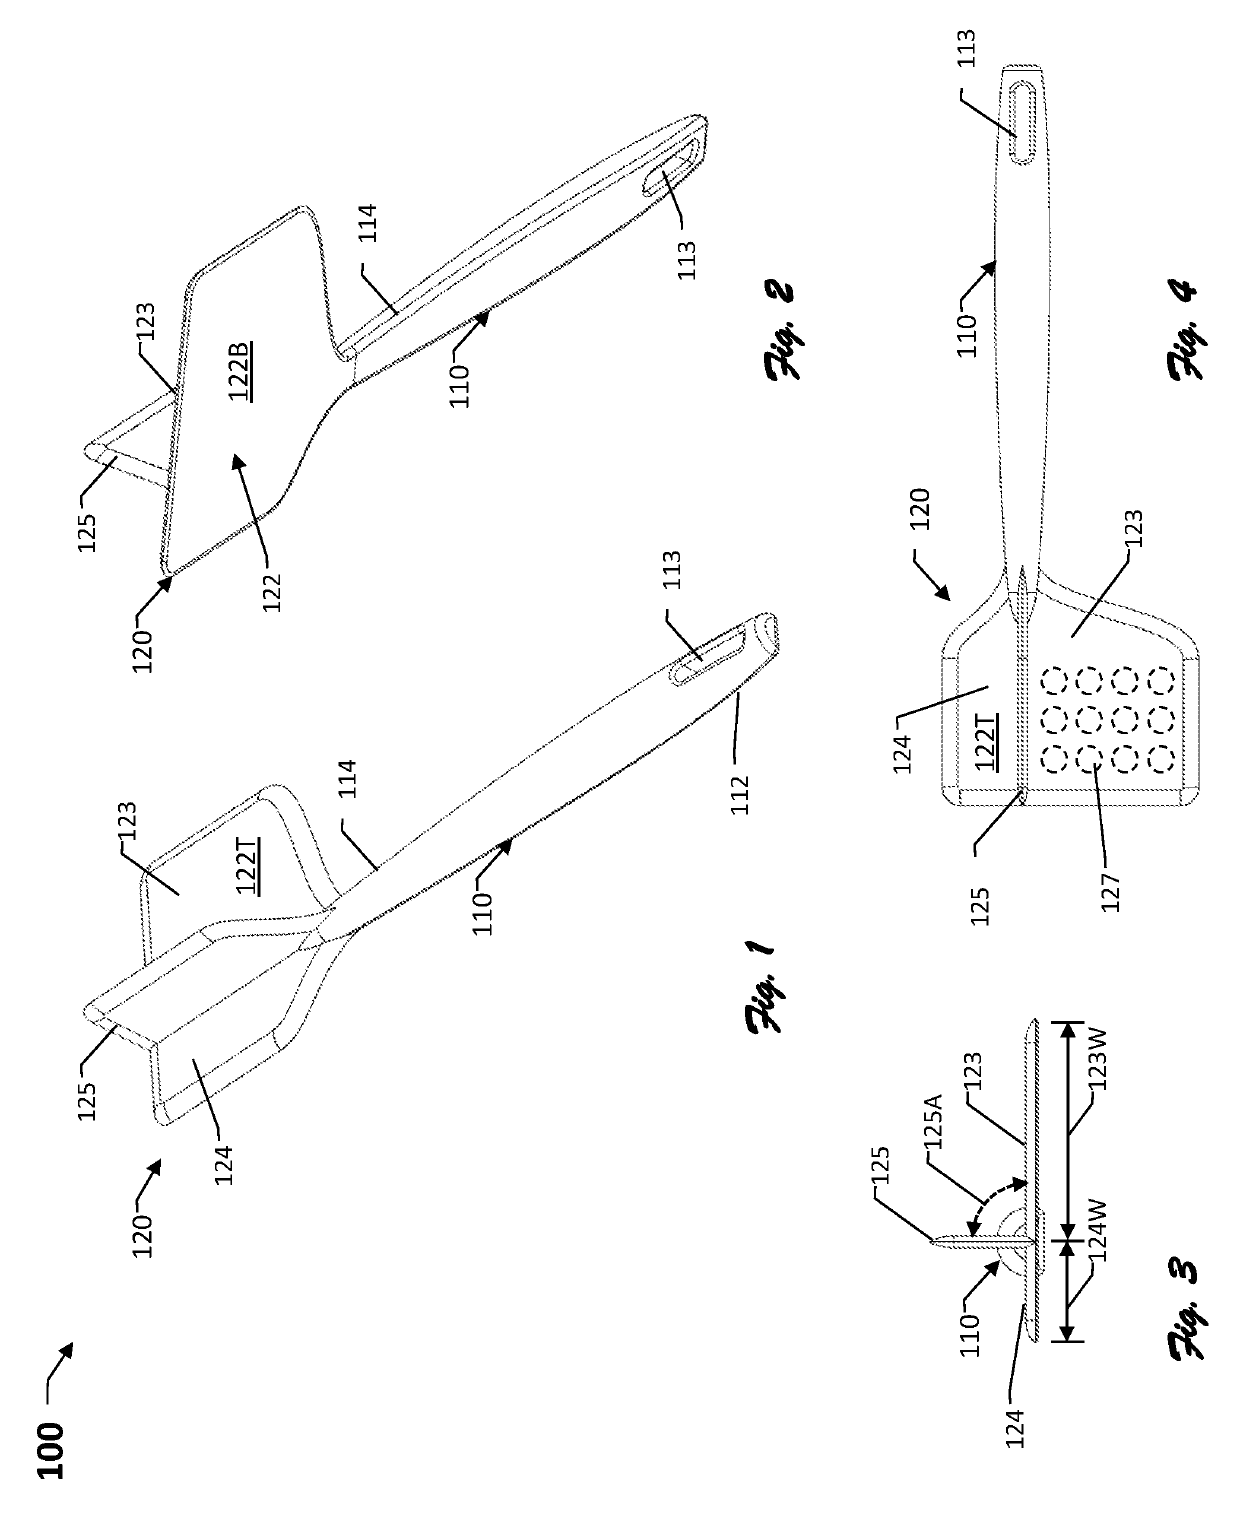 Device for chopping, turning, and serving ground meat